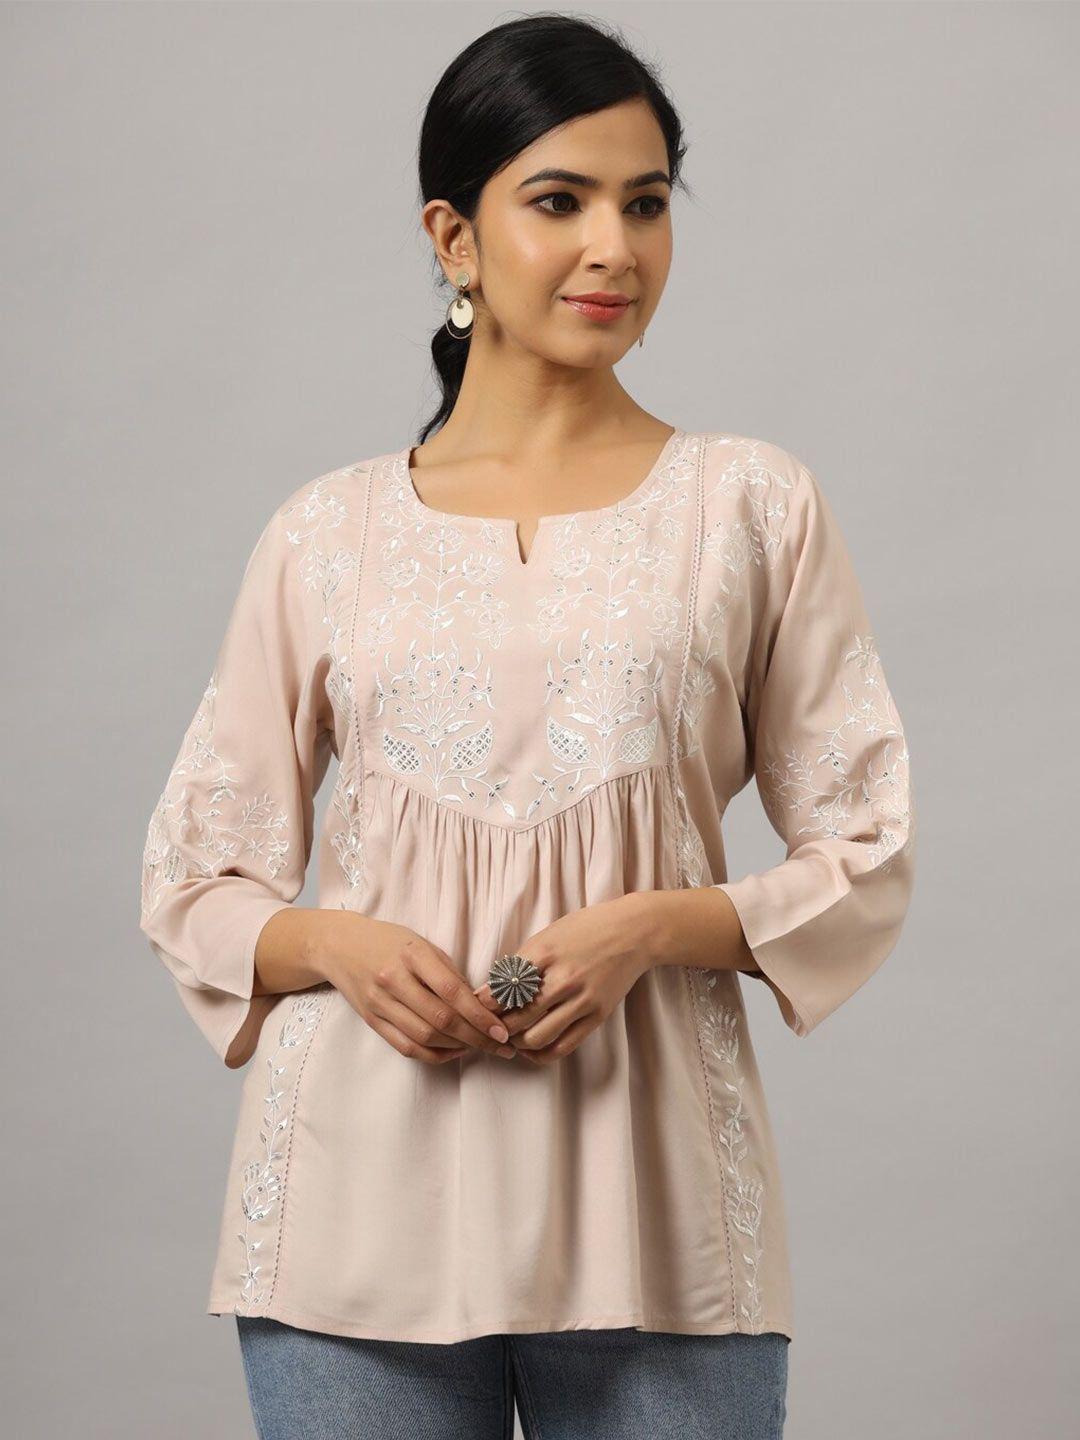 amchoor floral embroidered round neck sequined empire top